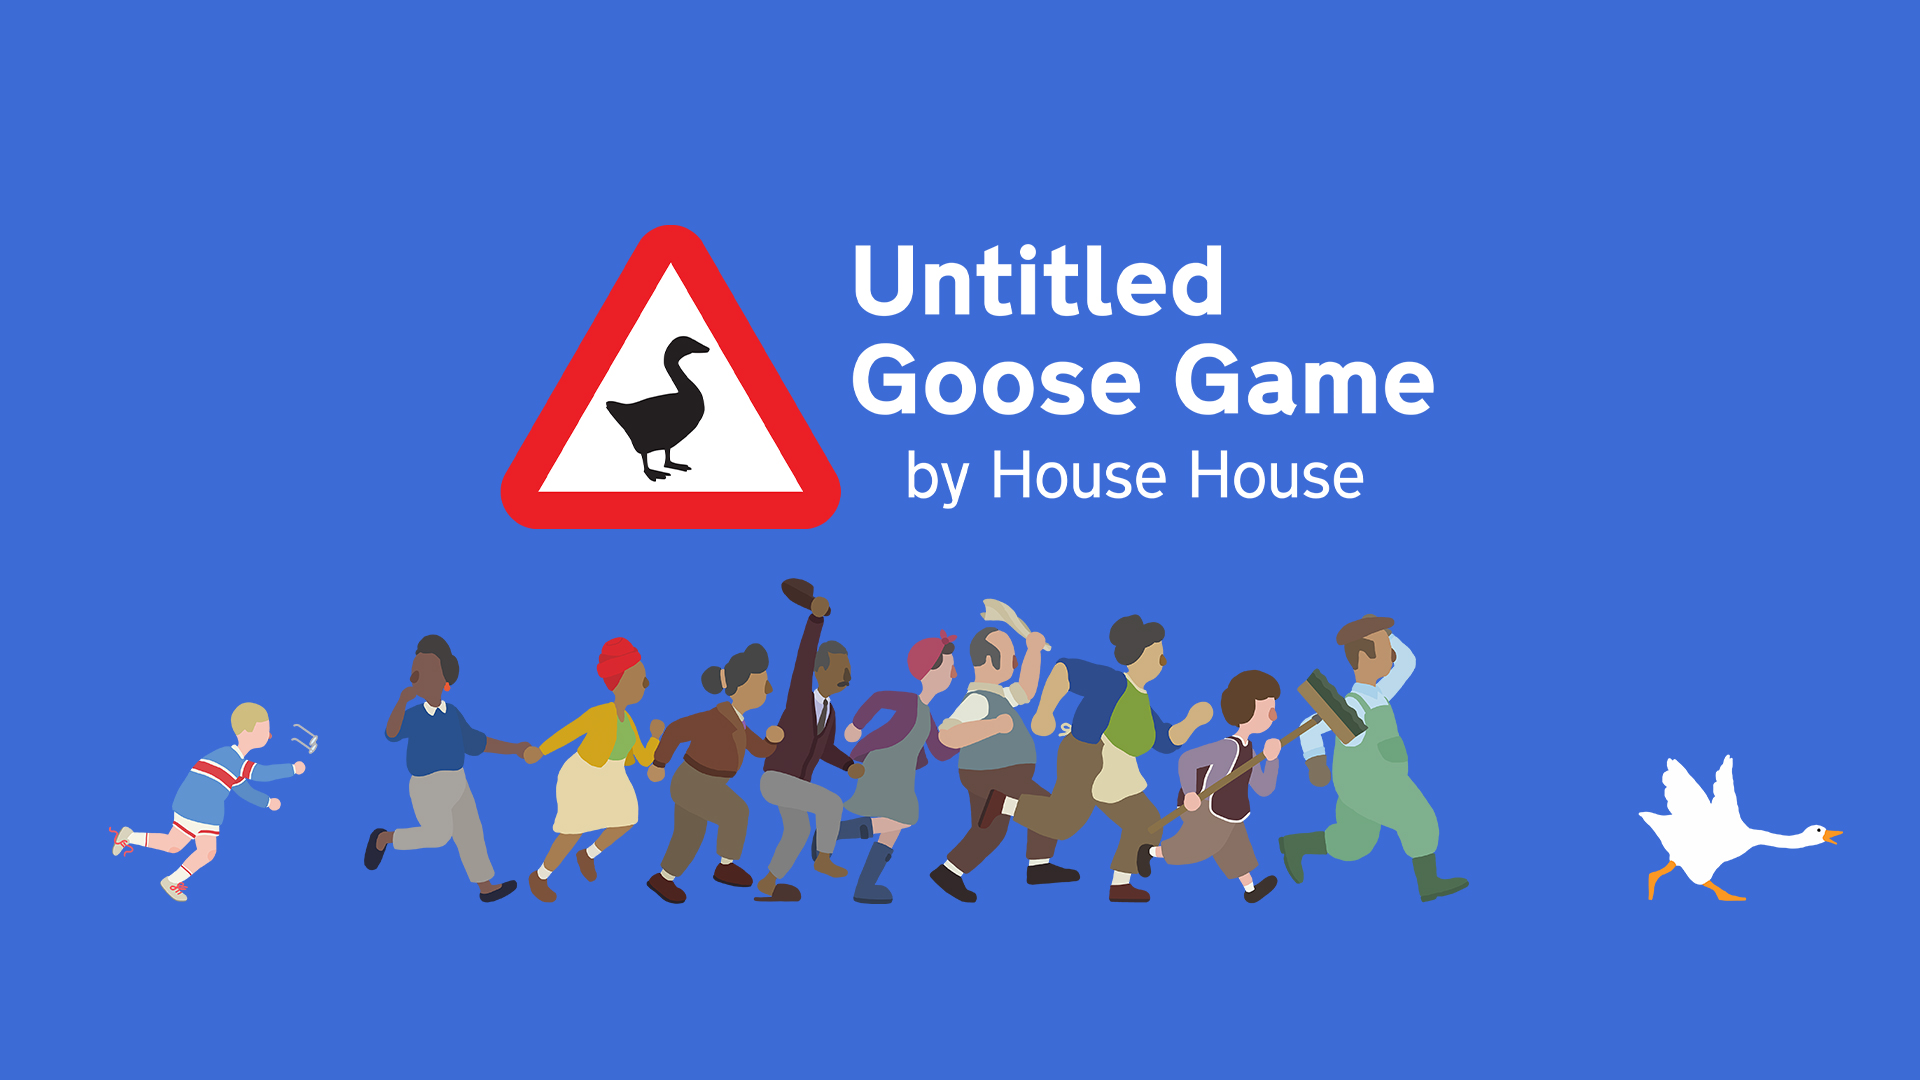 Untitled Goose PC Download free full game for windows